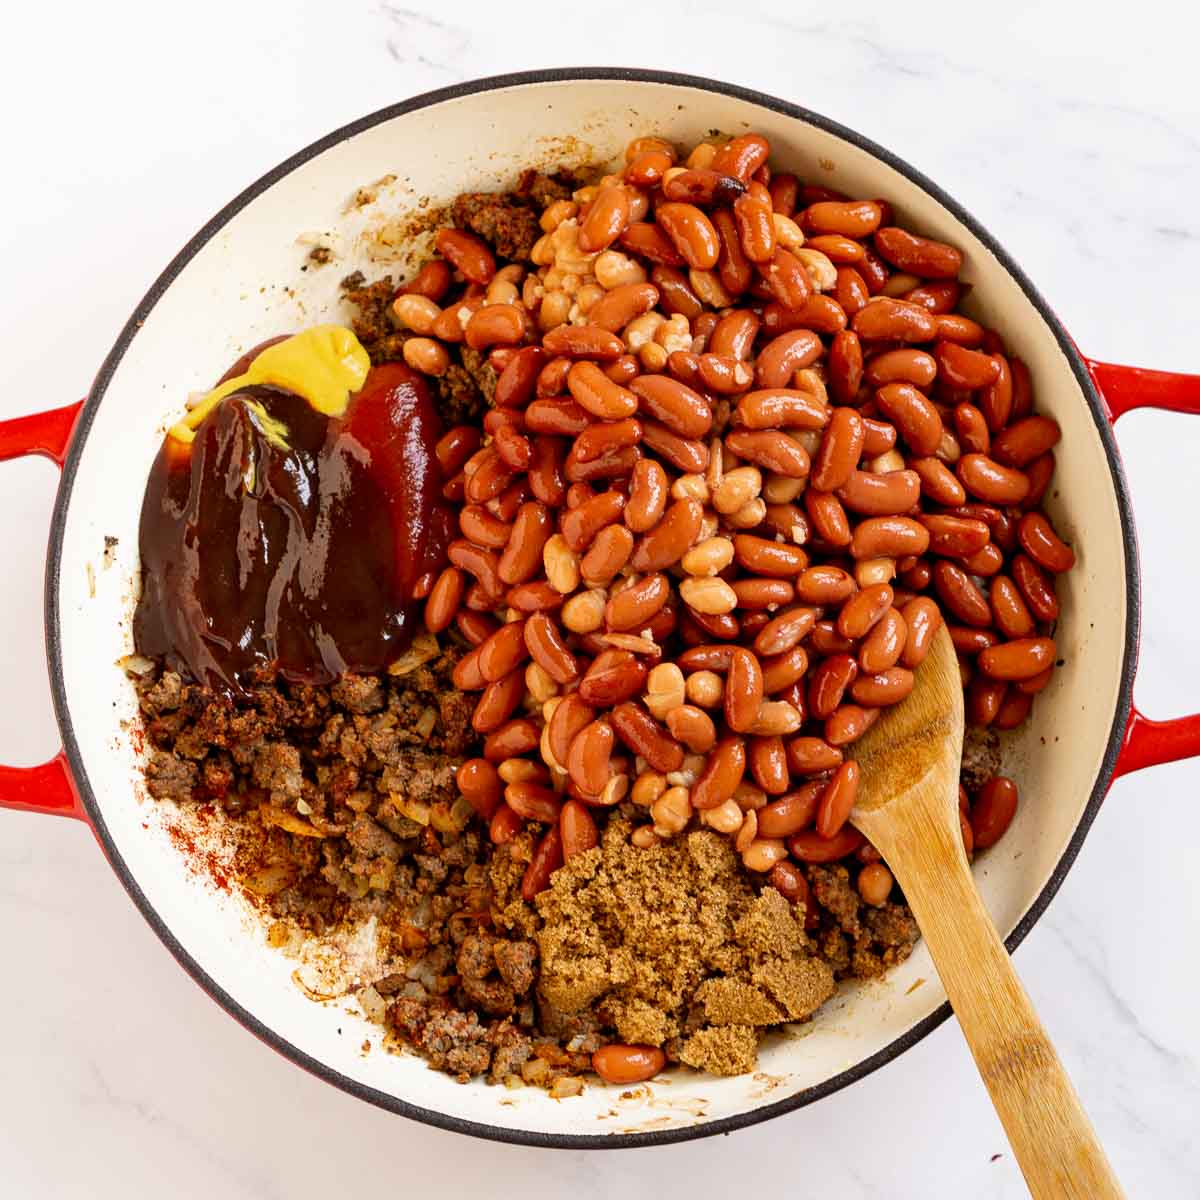 Beans, BBQ sauce, ketchup, and other ingredients added to a pan with ground beef.